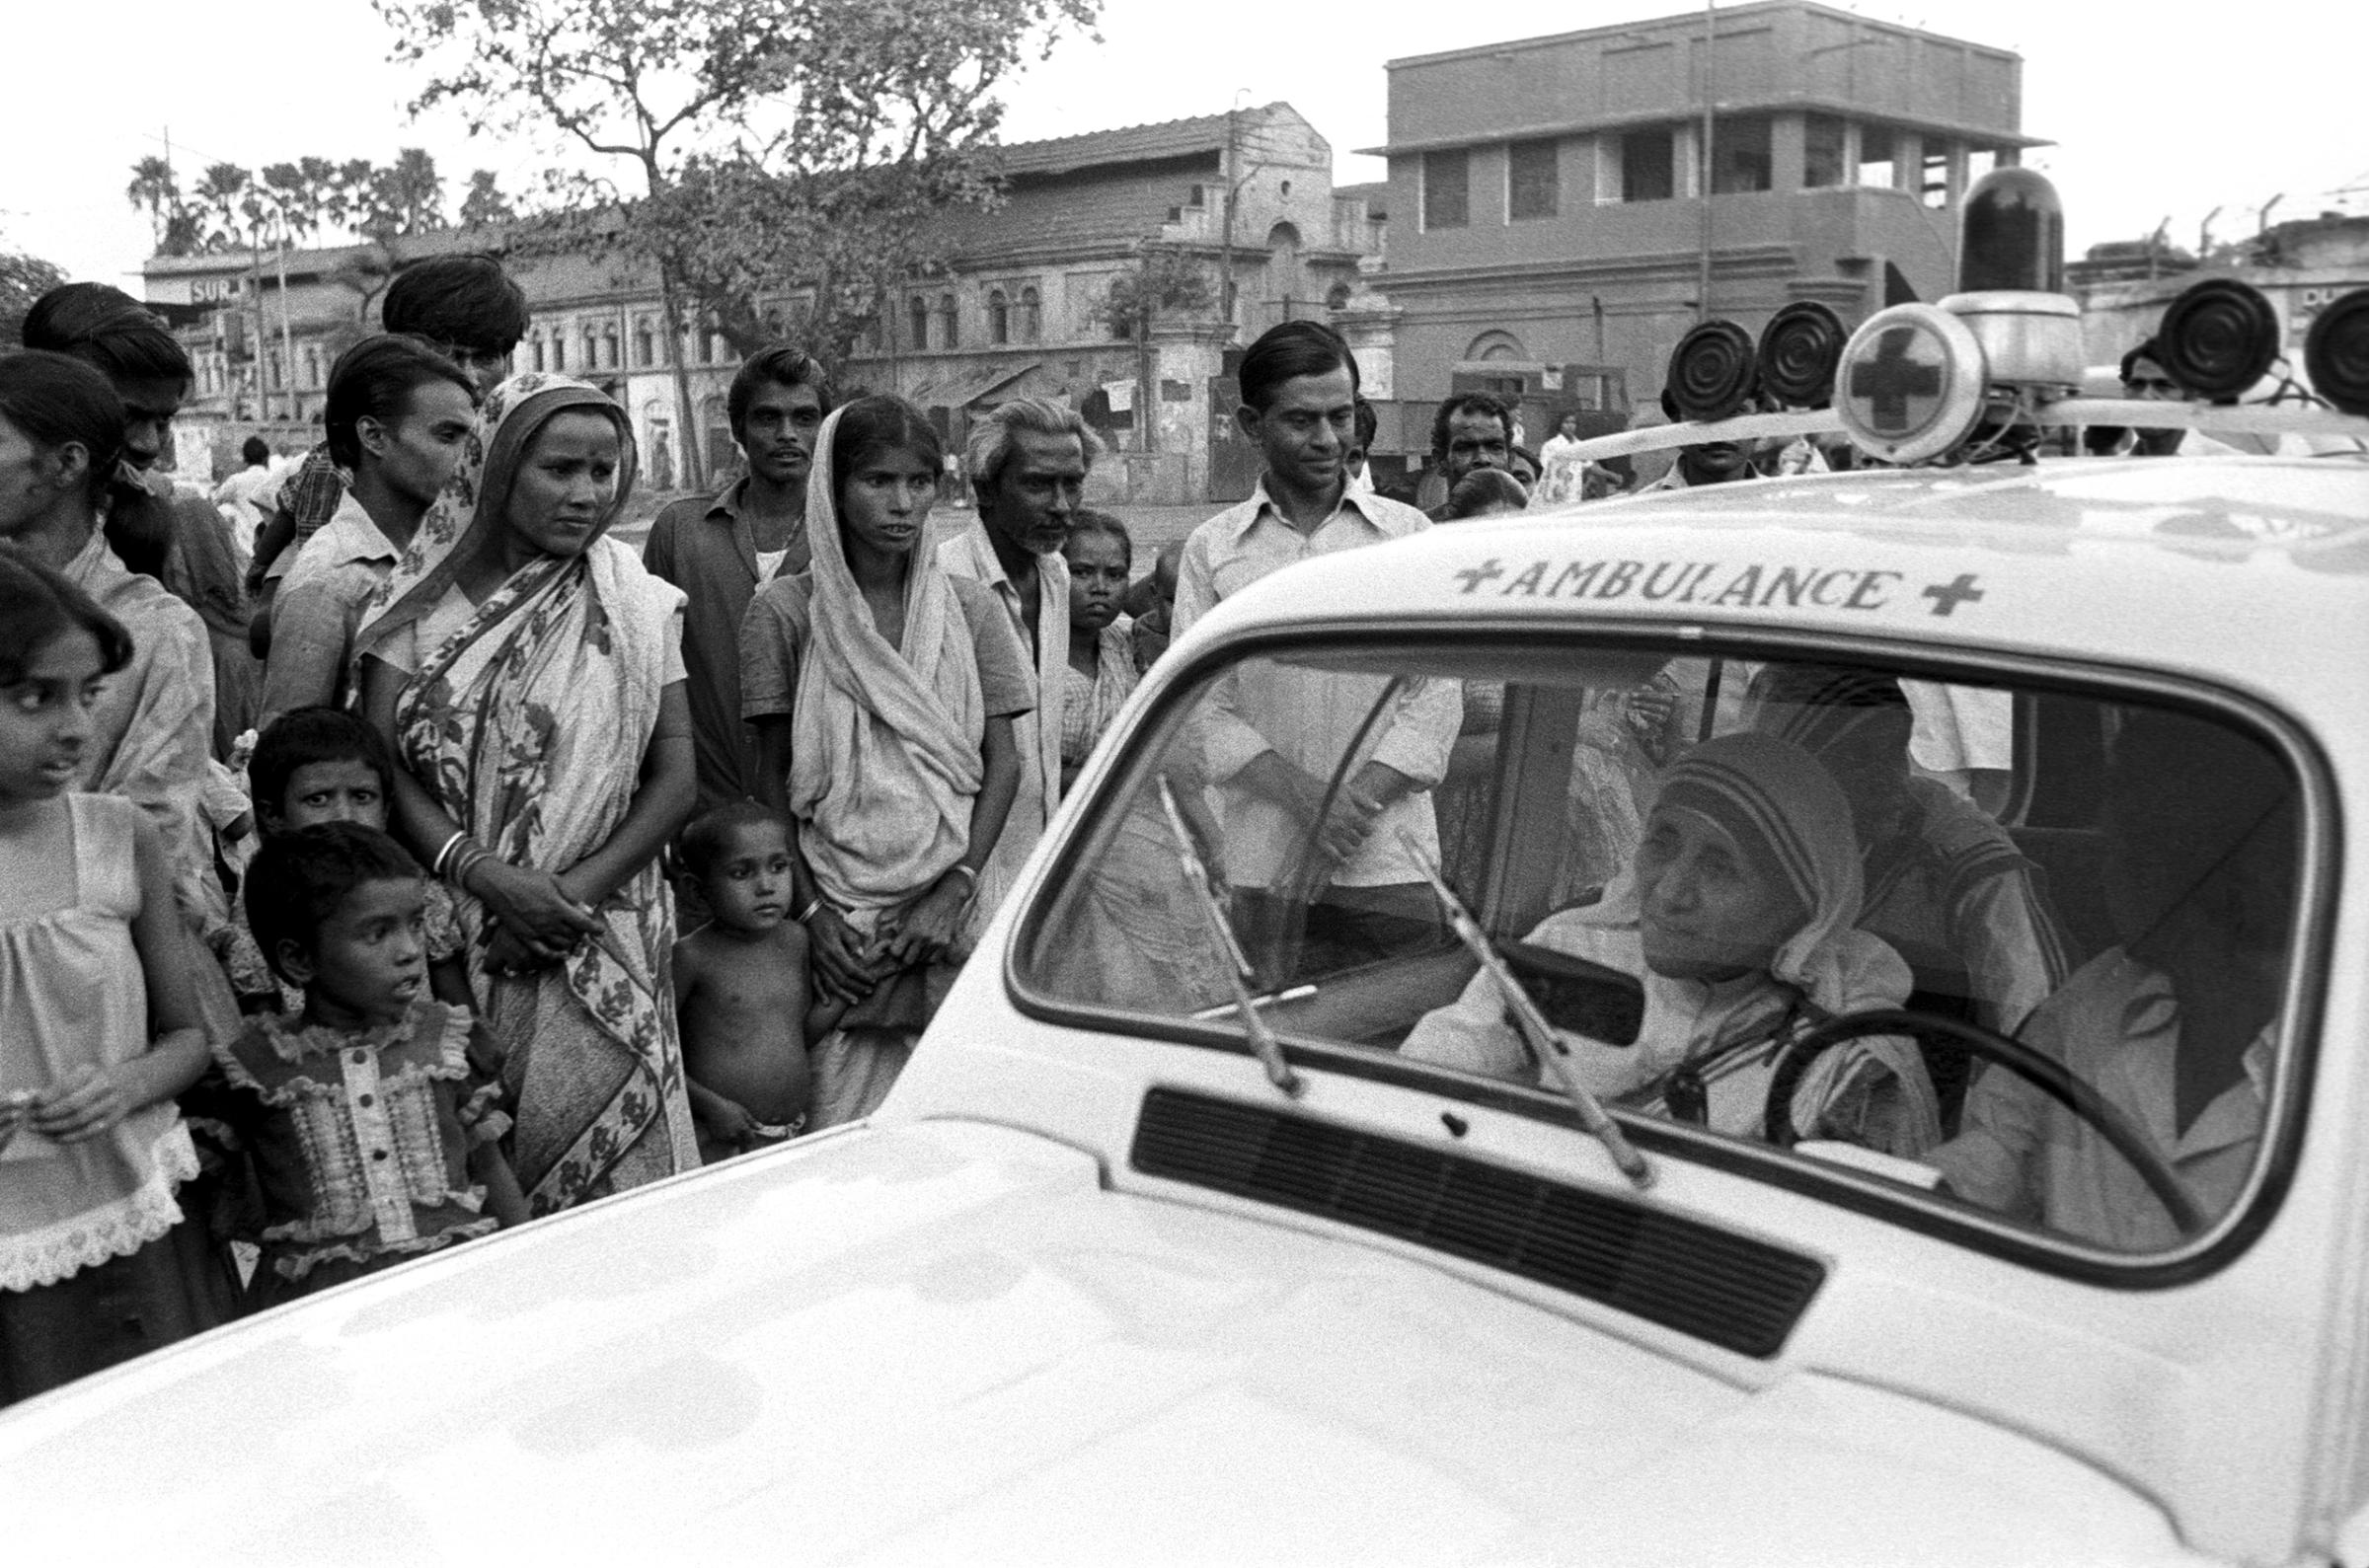 Mother Teresa rides in an ambulance alongside a group of impoverished people in Calcutta, India, in October 1979.